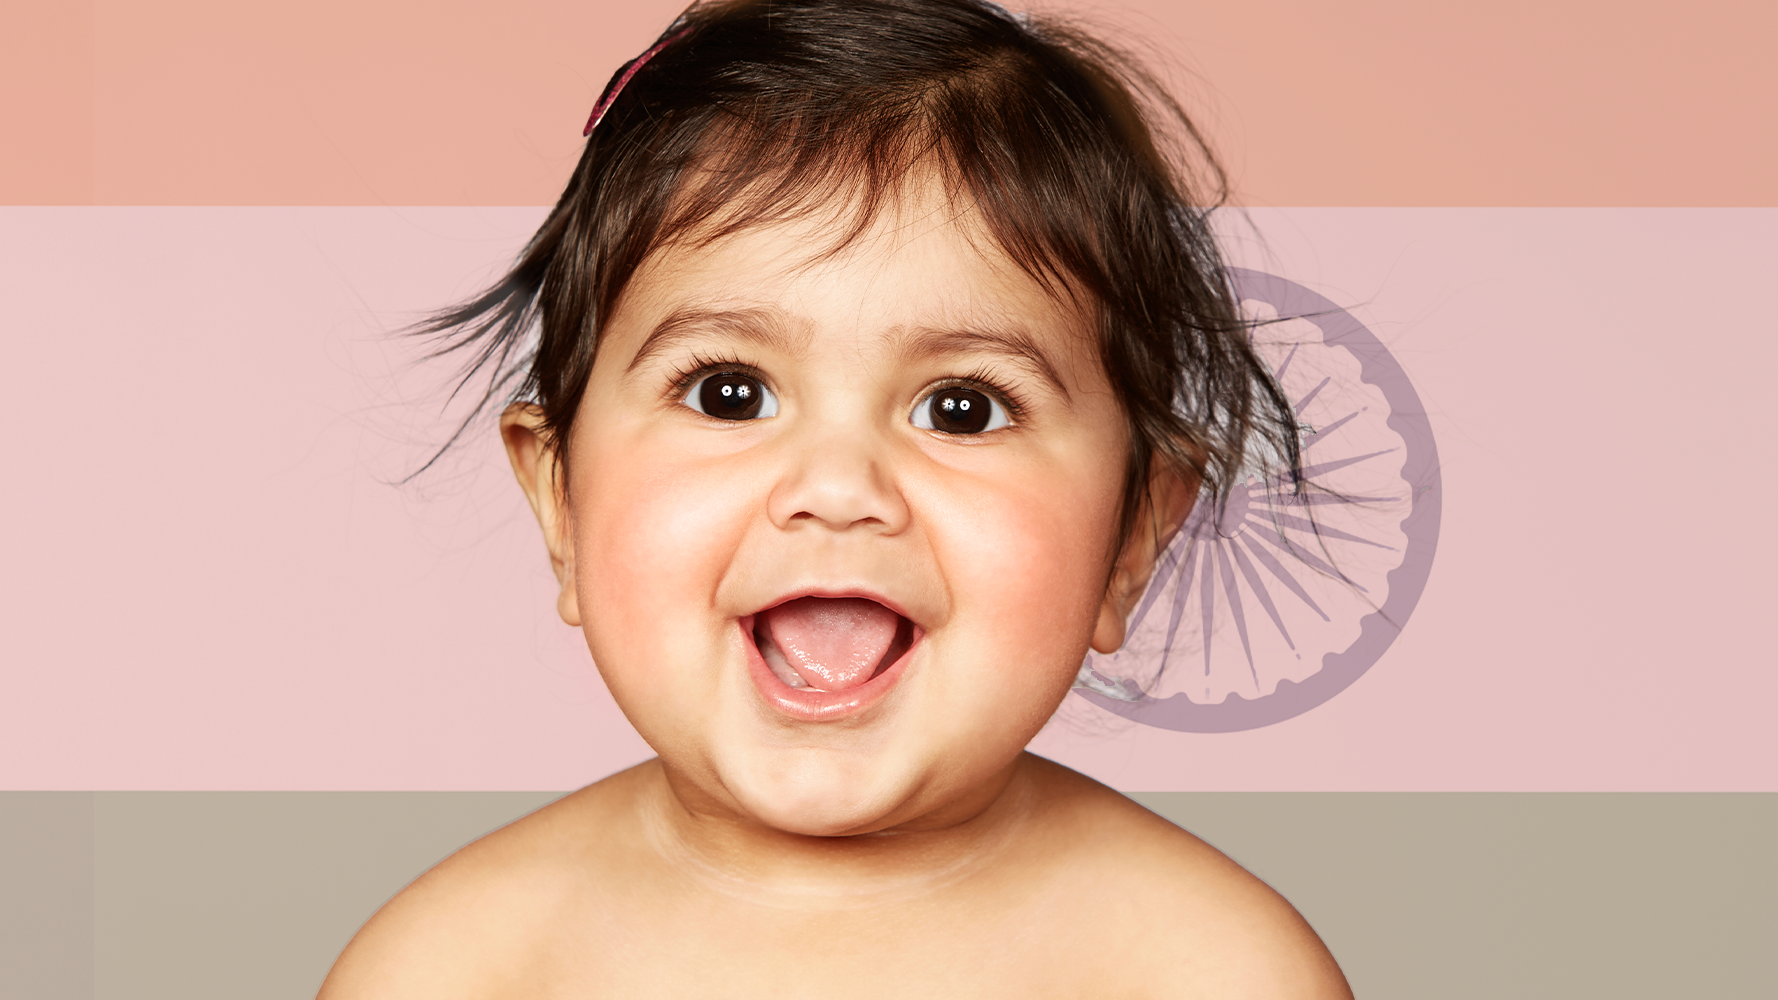 https://hips.hearstapps.com/hmg-prod/images/gh-100821-indian-baby-girl-names-1634155048.png?crop=0.888888888888889xw:1xh;center,top